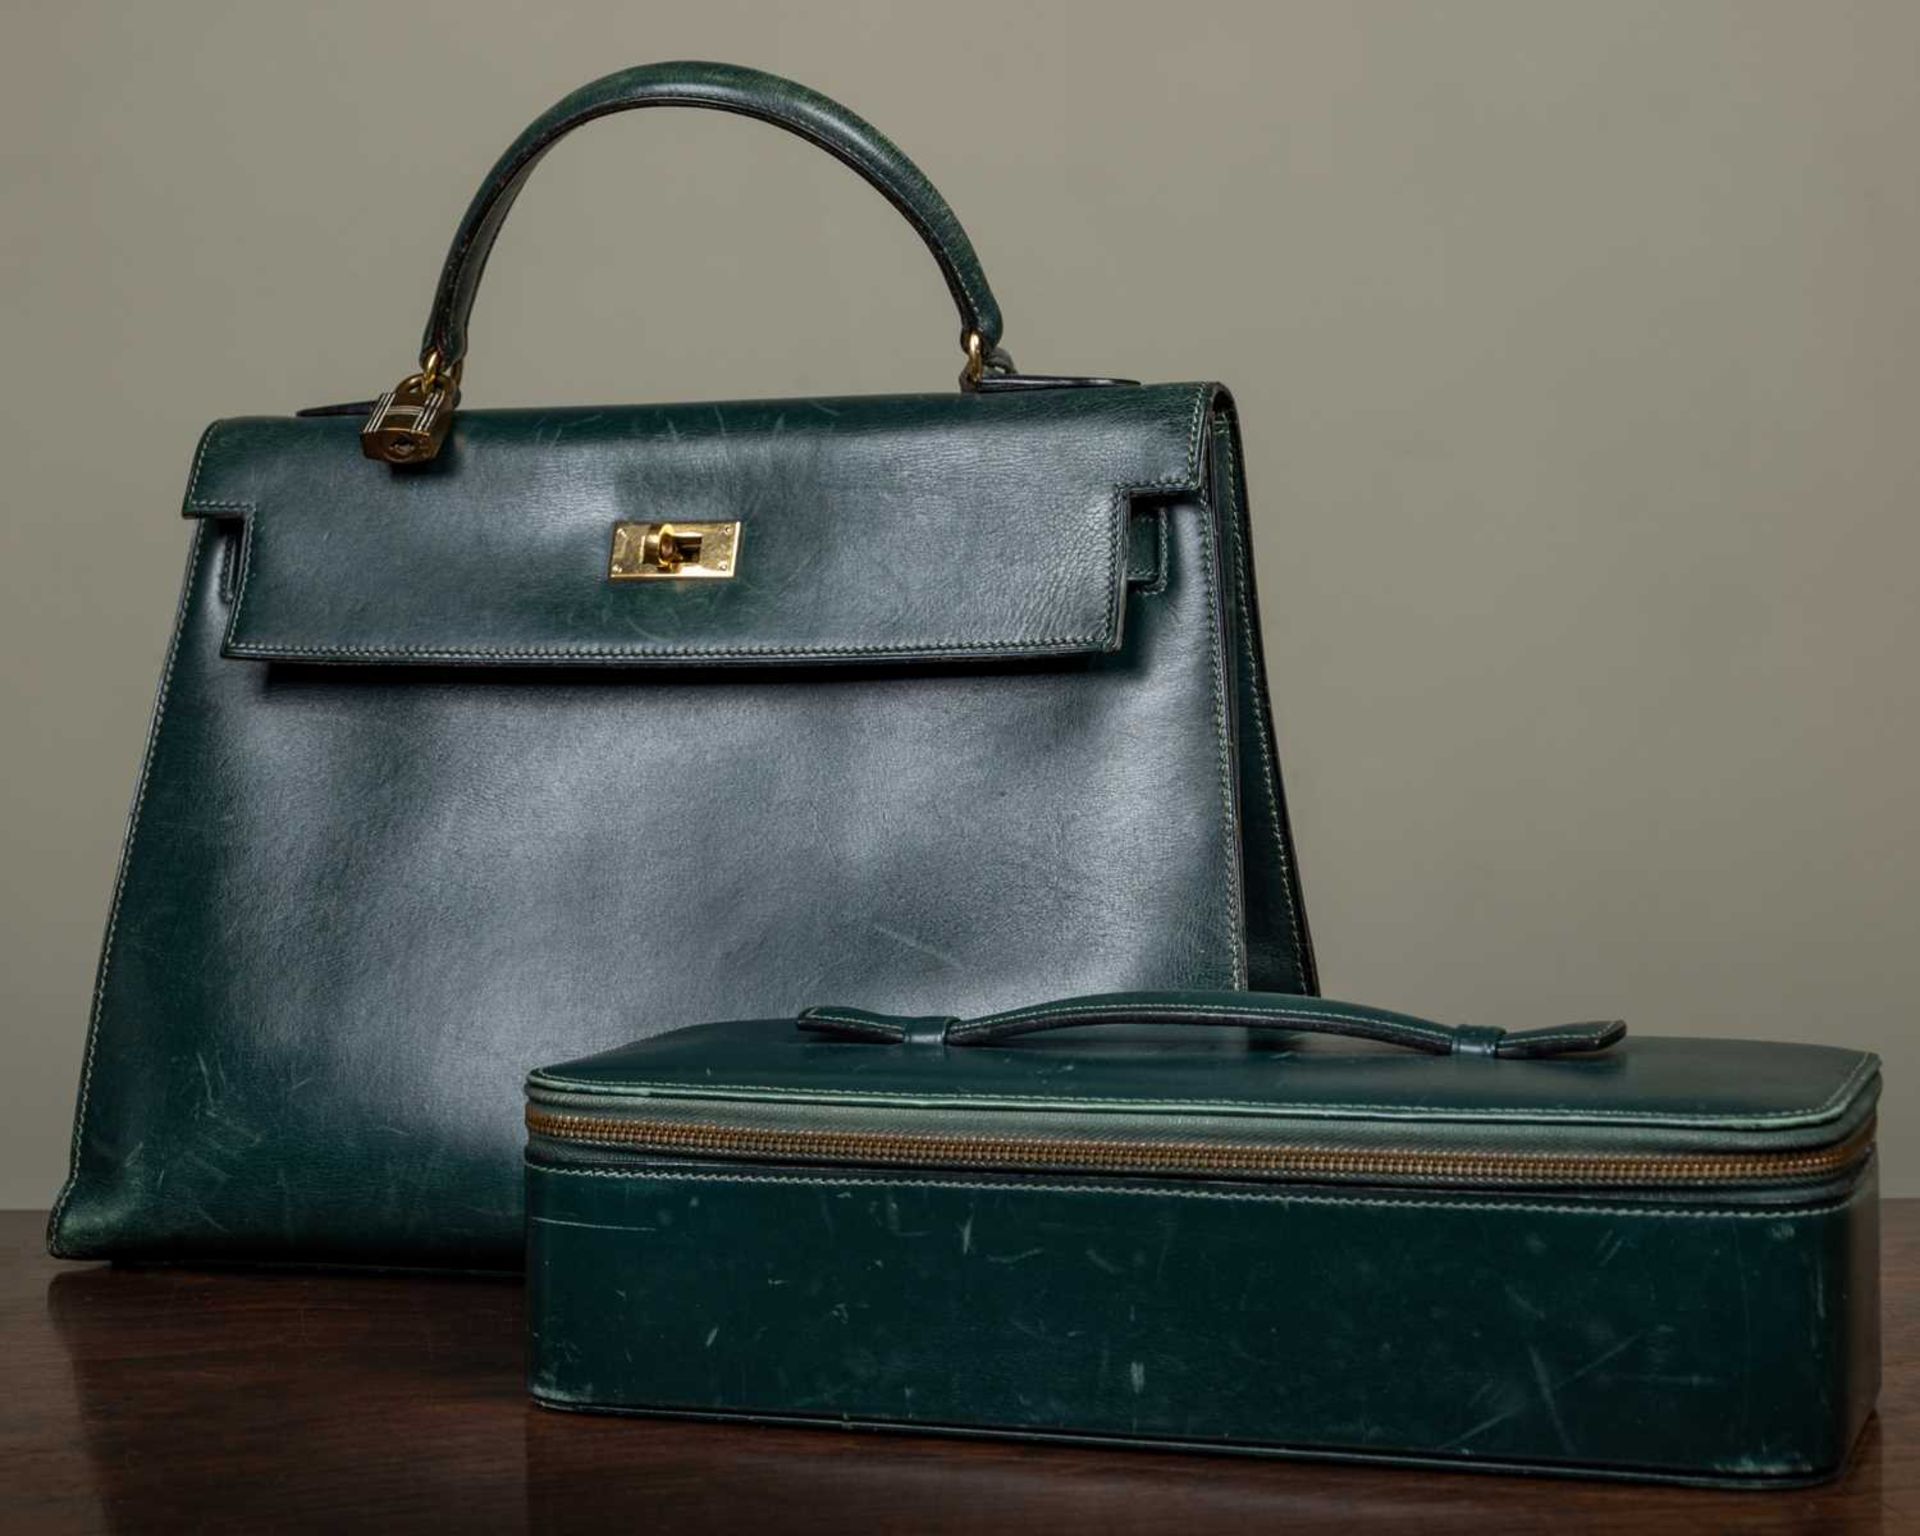 A Hermès 'Kelly' green leather handbag and matching jewellery case, the bag 33cm wide at the base - Image 18 of 18